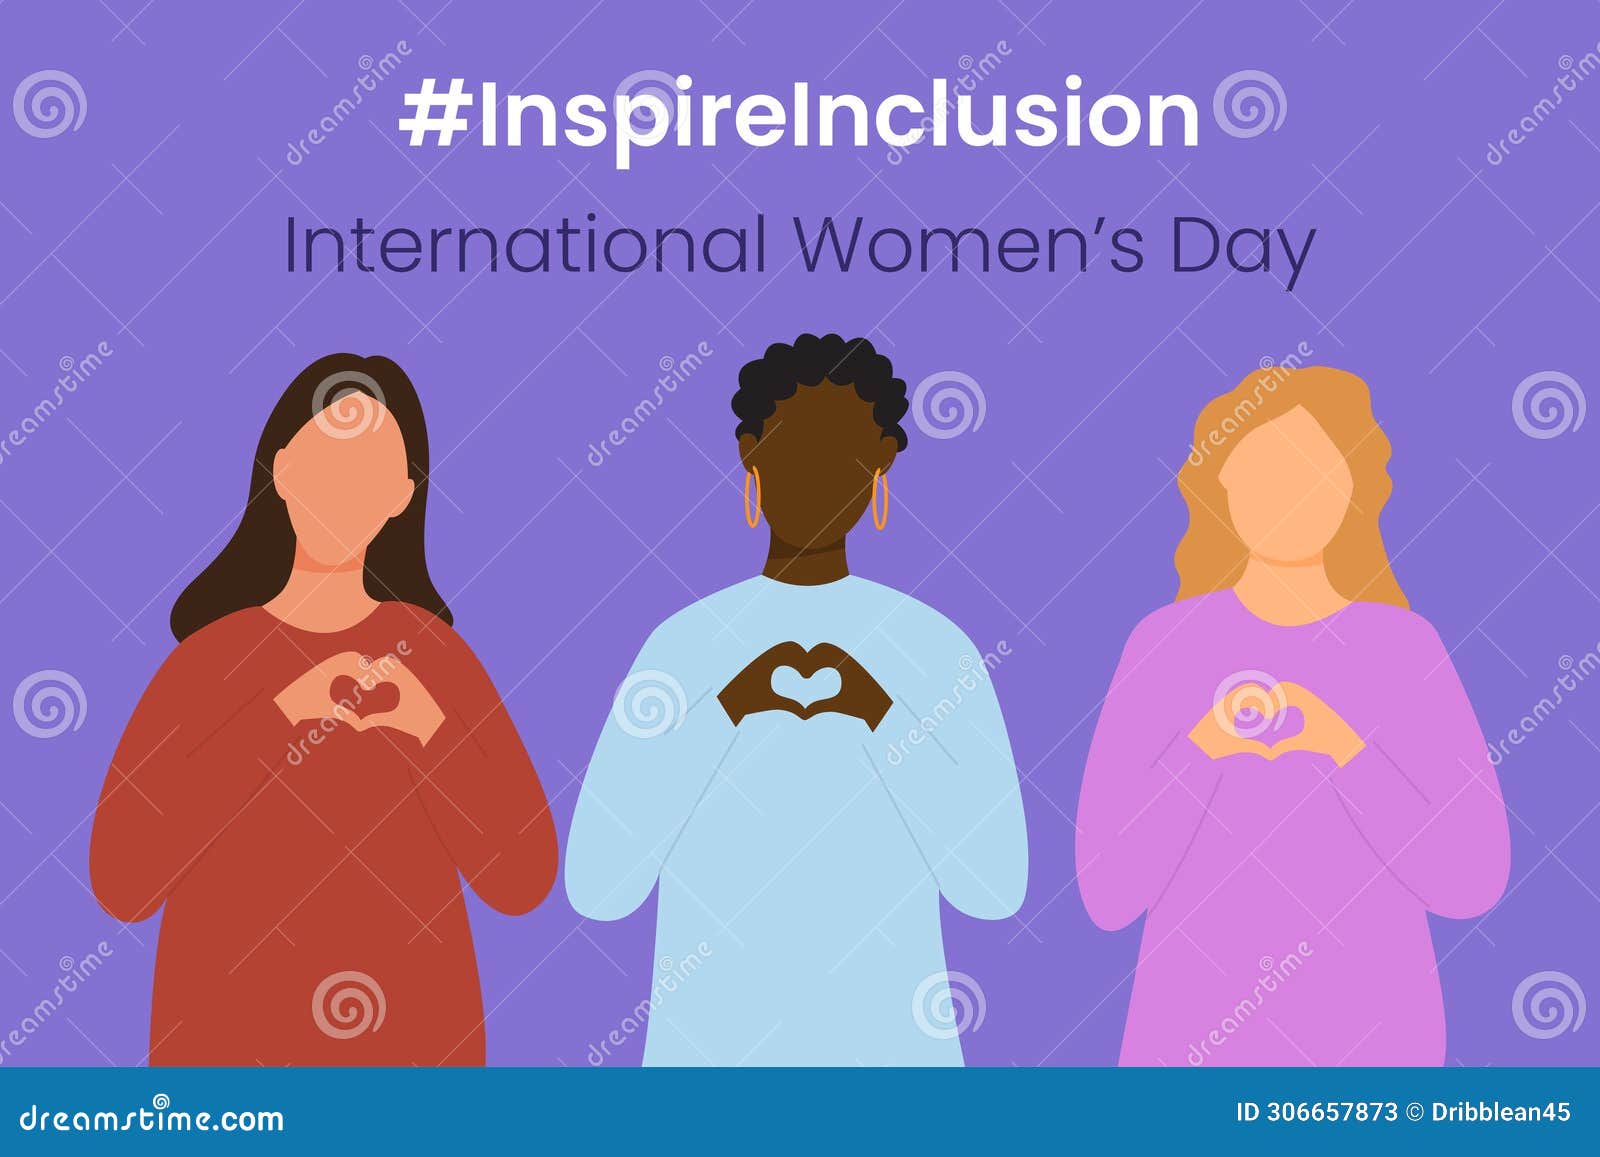 inspire inclusion slogan international women's day 8 march 2024. iwd world campaign.  women's characters